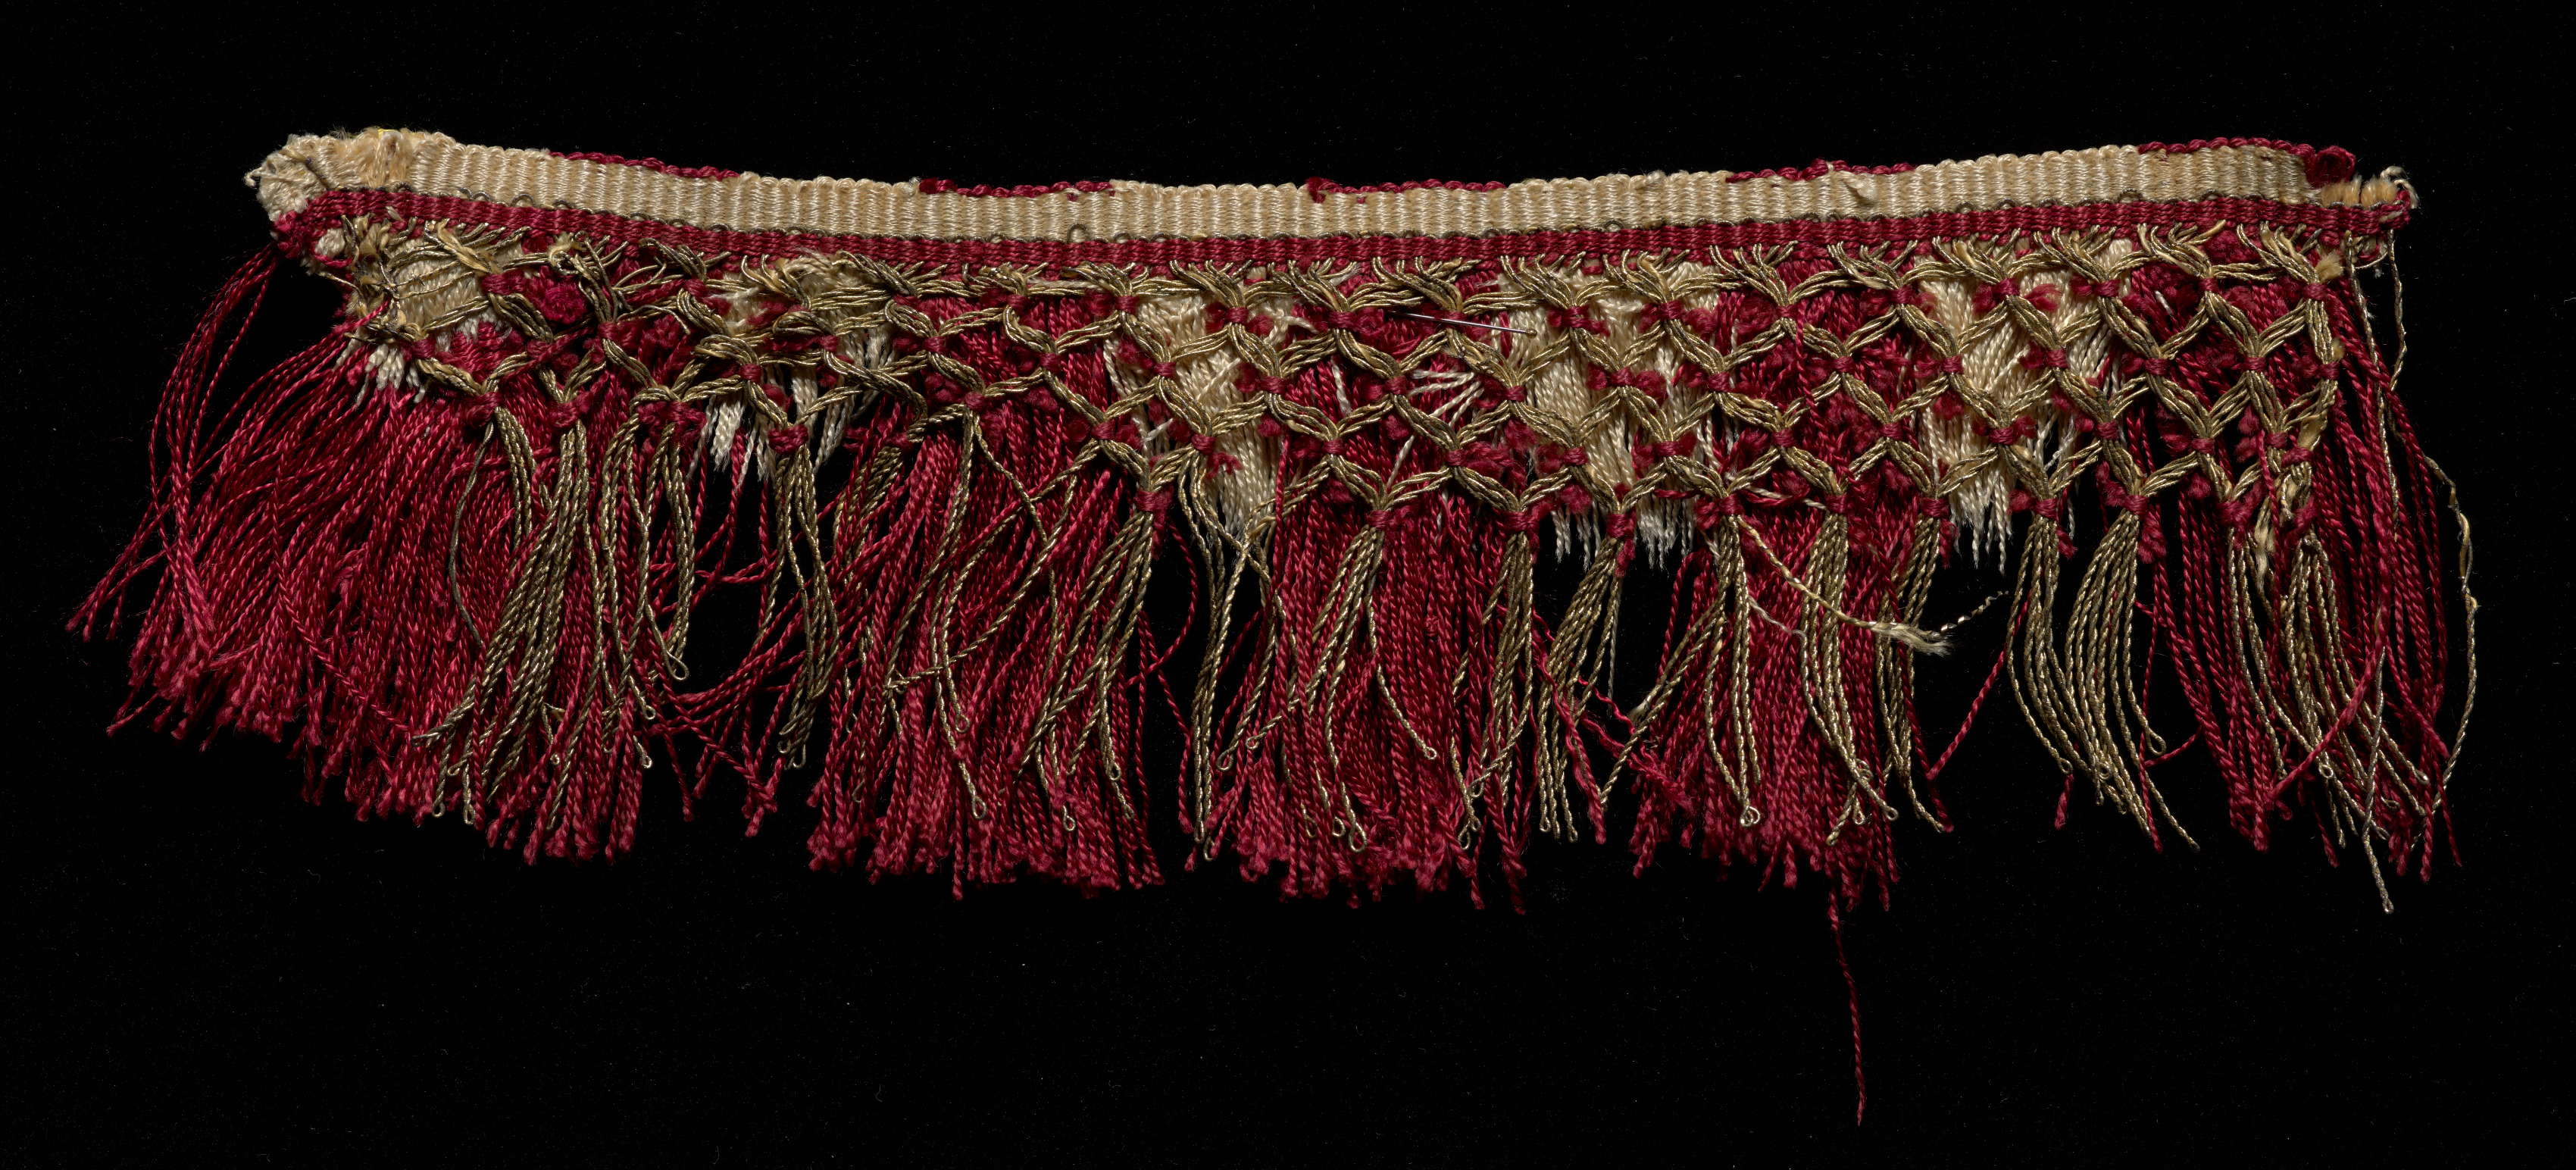 Knotted Lace Edging of Fringe